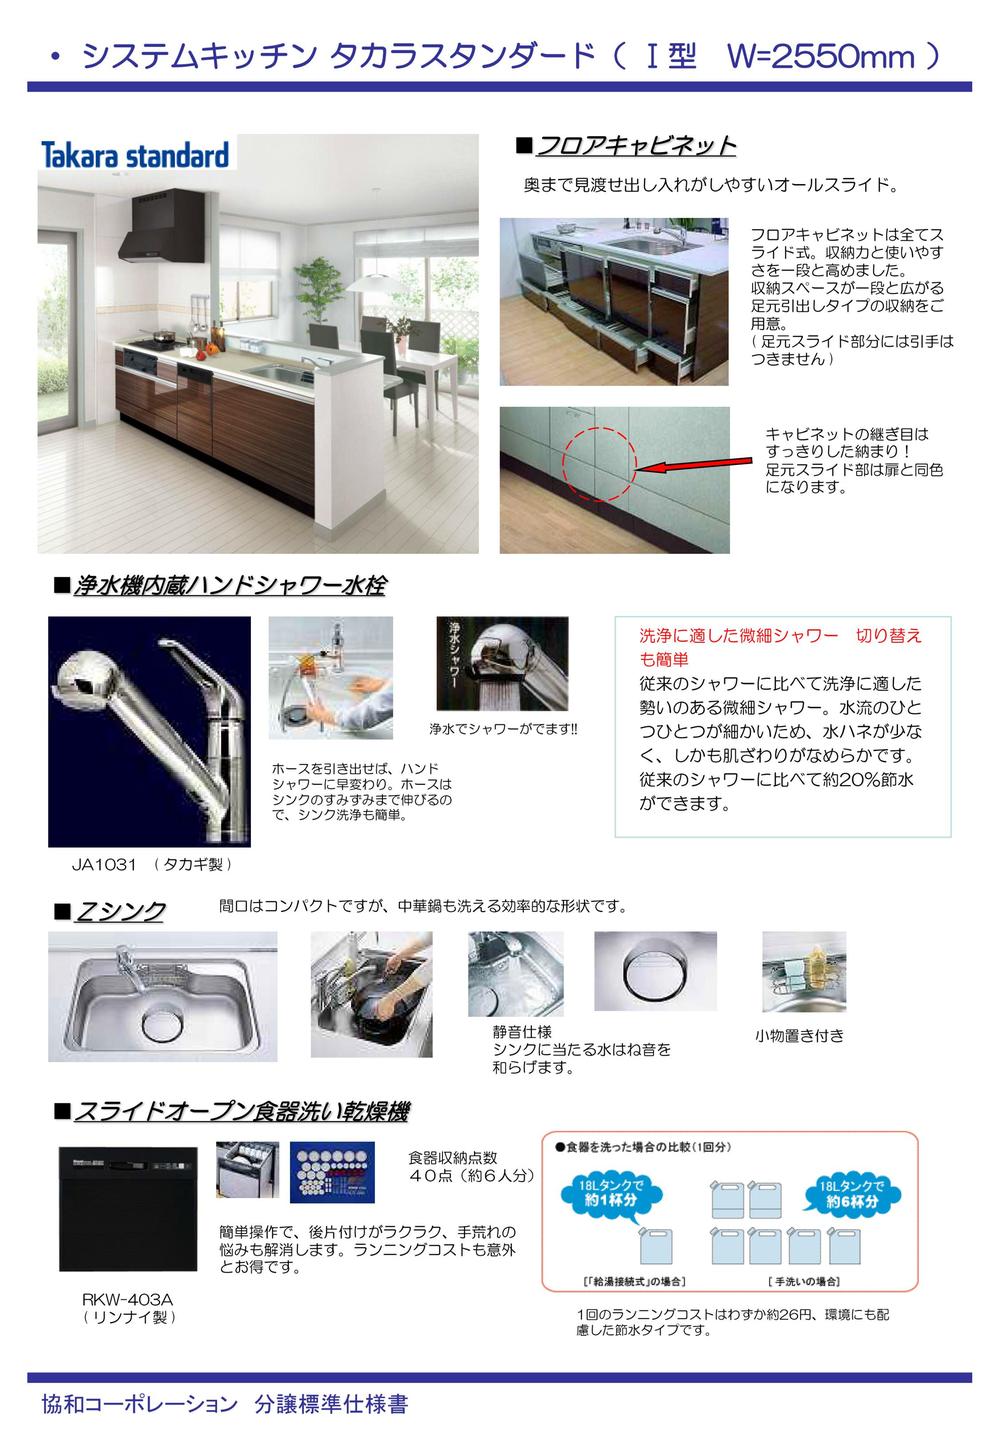 Other Equipment. Spacious face-to-face kitchen with the width 255 cm dishwasher water purification function